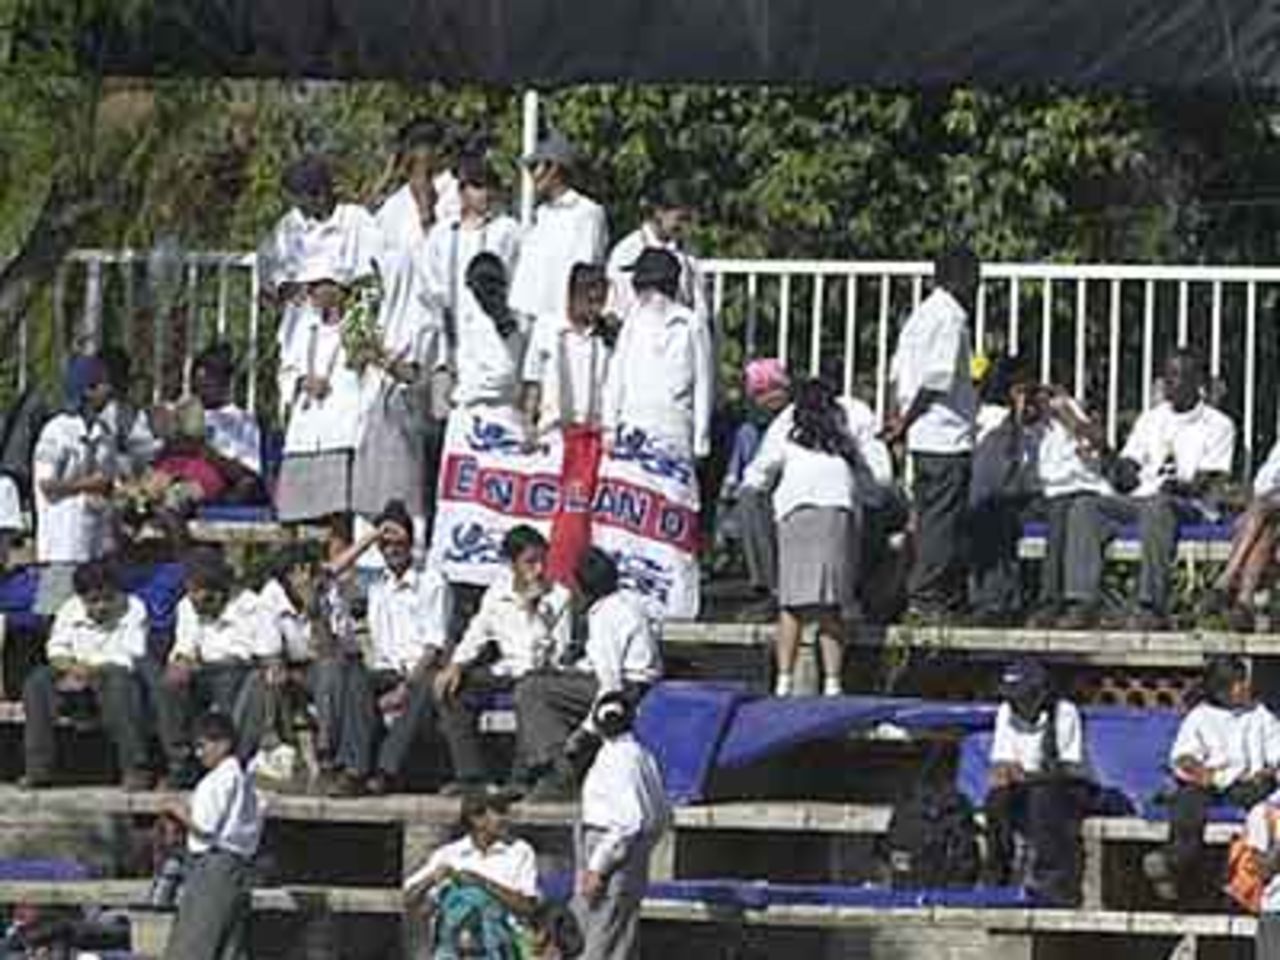 English fans during their quarter-finals match against South Africa, 10 October 2000.